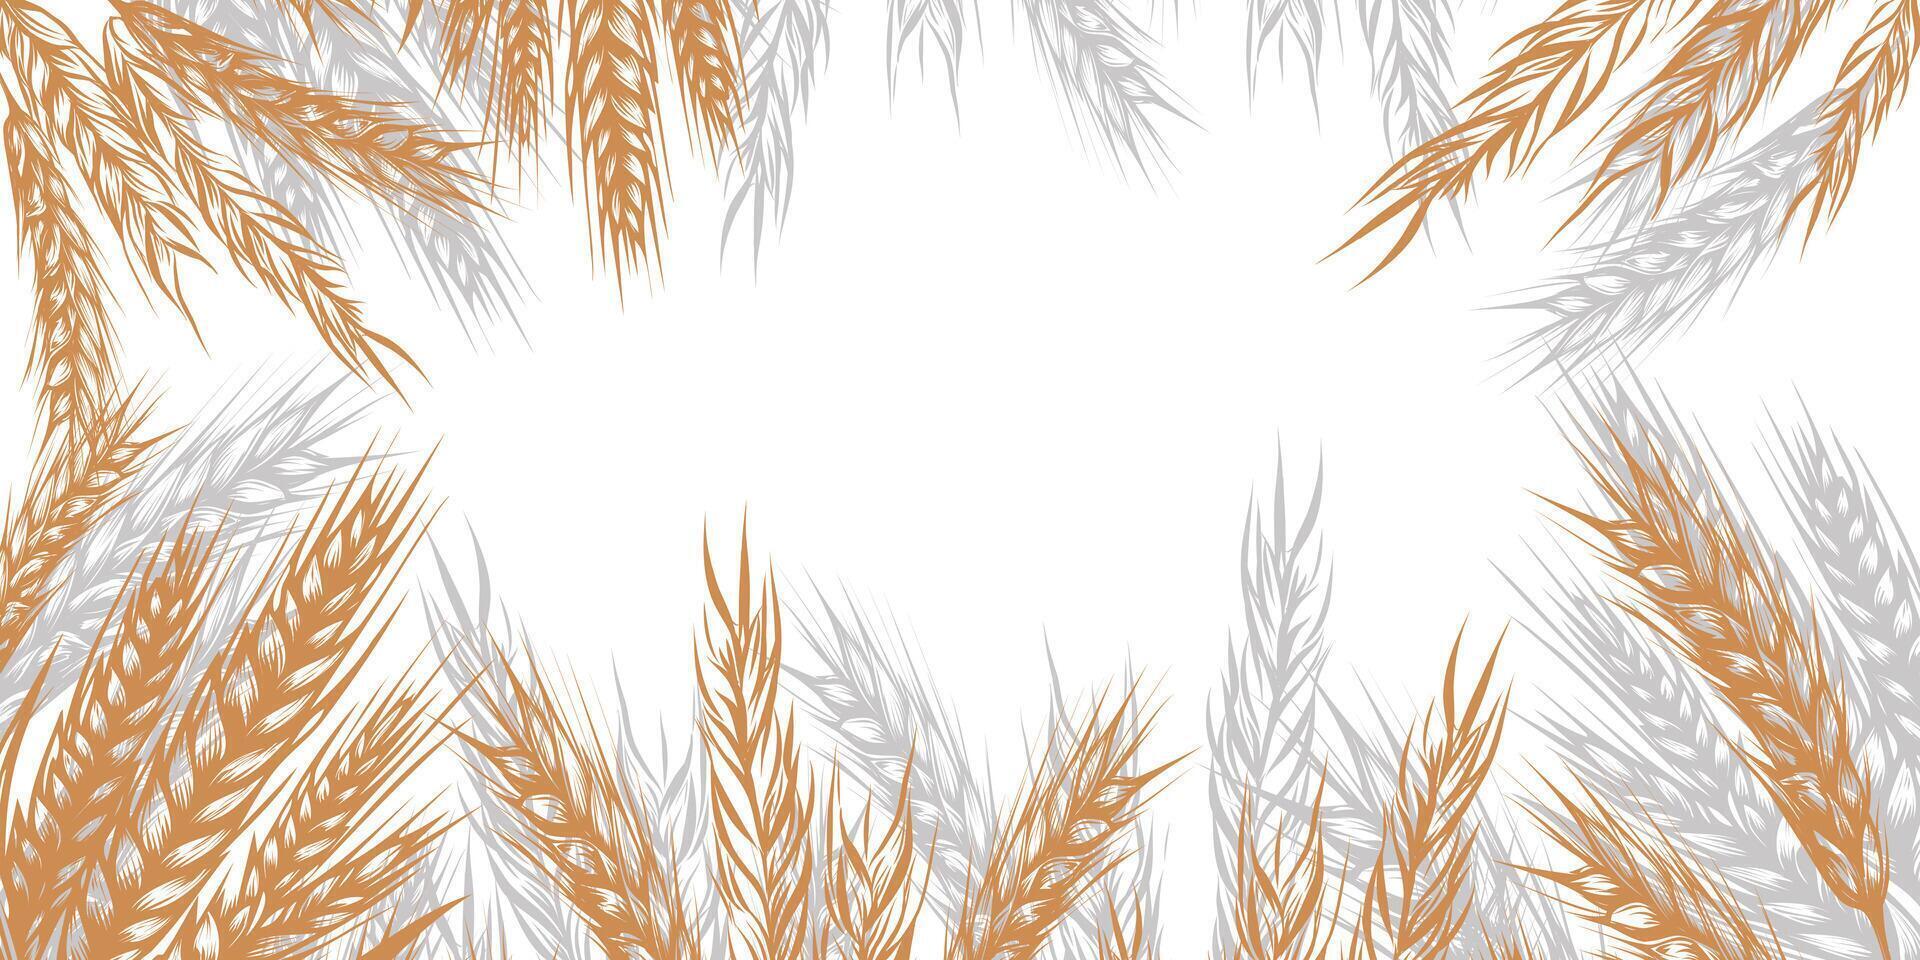 Border order of spikelets of wheat, rye, barley with copy space. Background for packaging, bakery shop, flour products, farm products, vector illustration isolated on background.